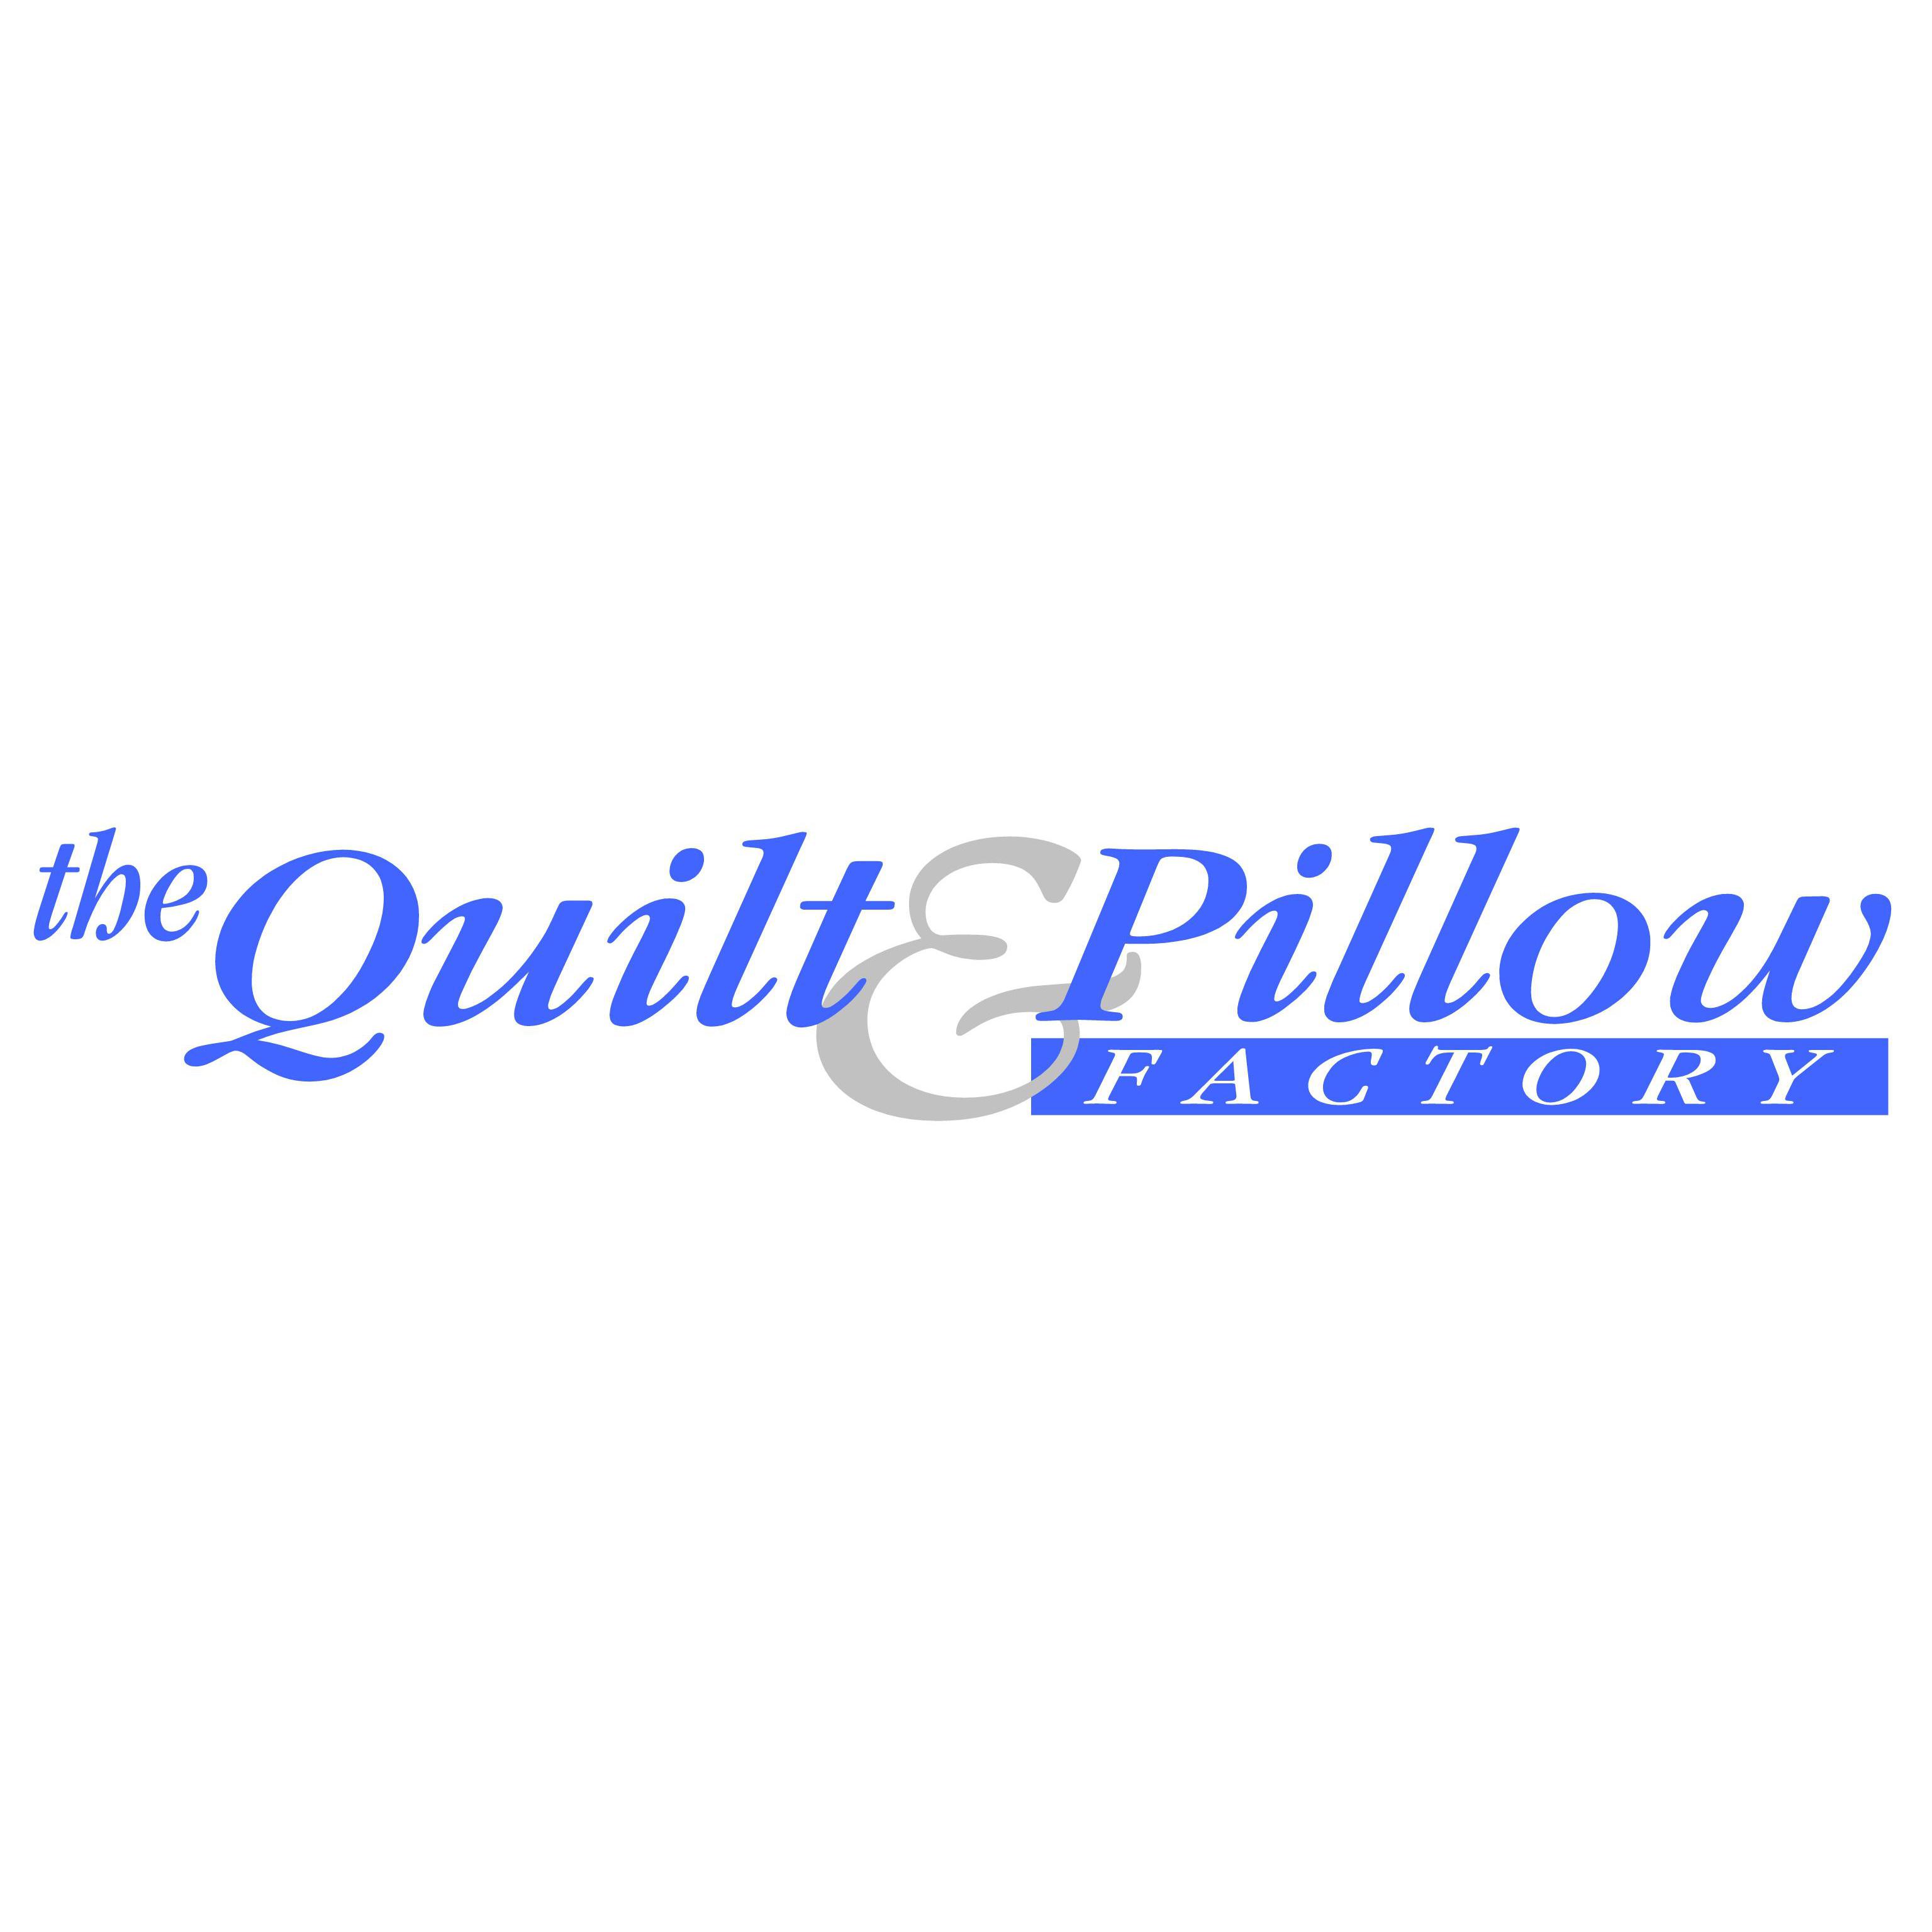 The Quilt & Pillow Factory - New Town, TAS 7008 - (03) 6228 1026 | ShowMeLocal.com